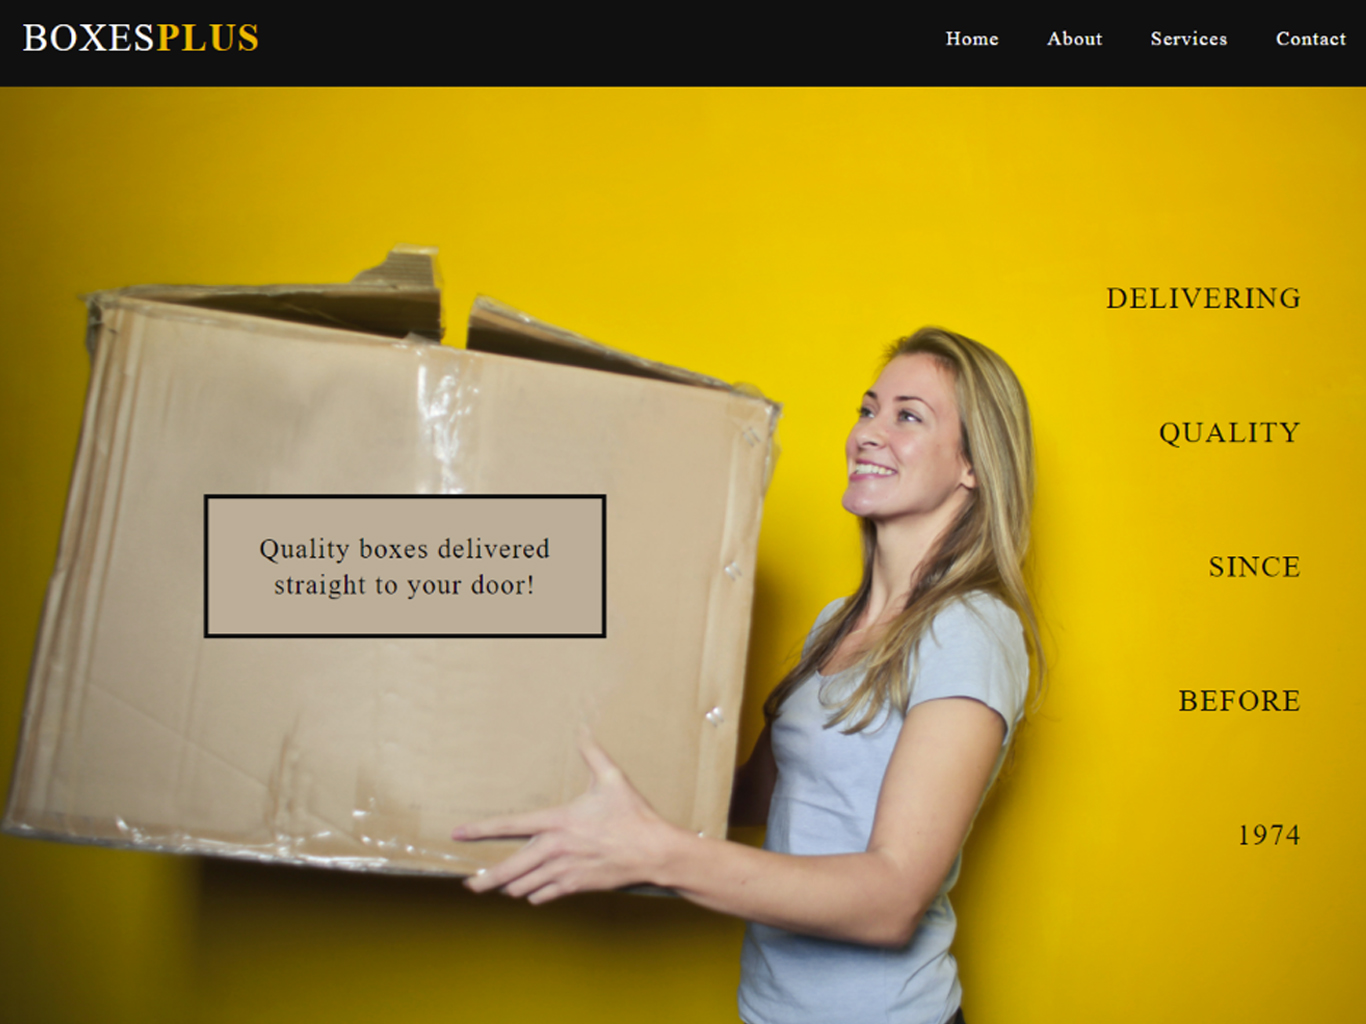 A webpage display for a fictional delivery service company called Boxes Plus; there is a woman smiling while holding a large cardboard box.